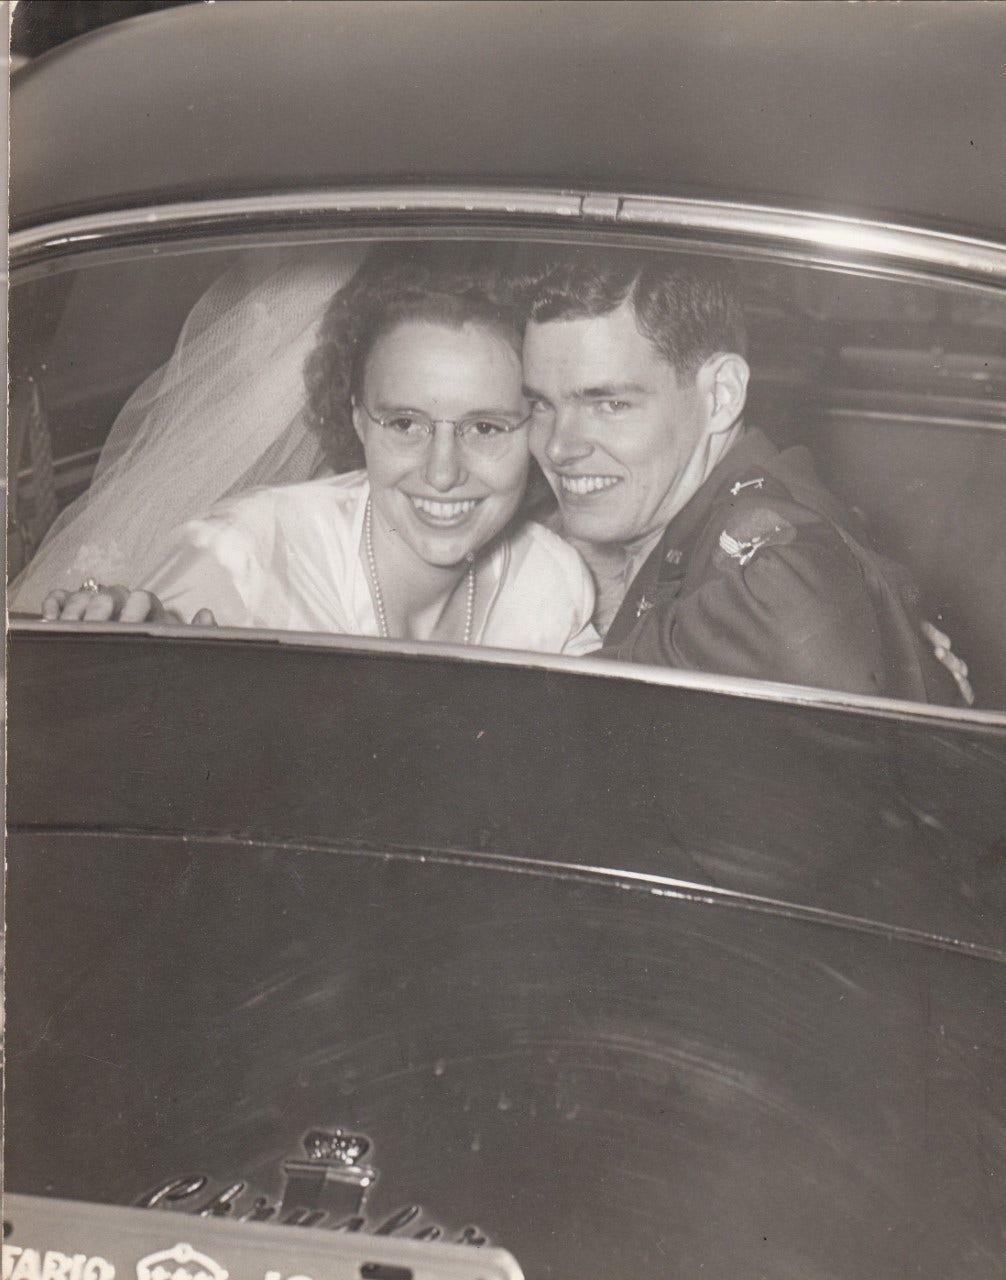 Valentine's Day memory – my mother wore a WW2 parachute wedding dress